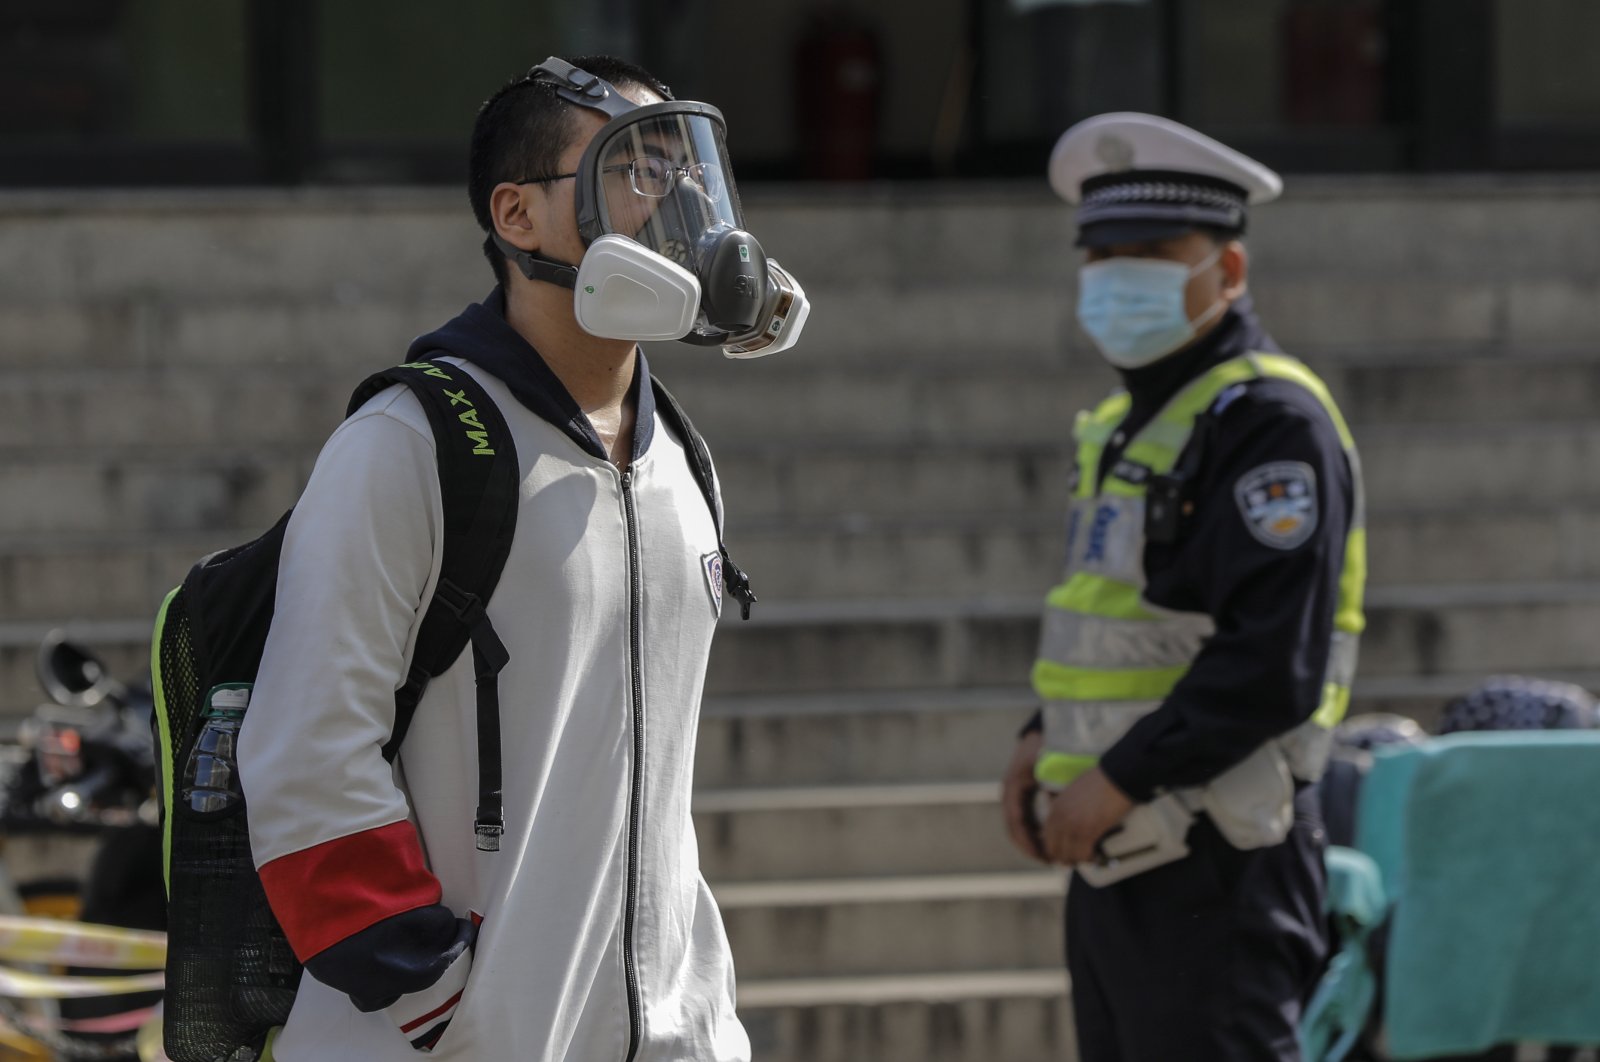 A student wearing a face mask leaves a high school in Beijing, China, 27 April 2020. Senior students in Beijing return to class for the first time after schools were closed down in January due to the outbreak of the coronavirus and COVID-19 disease. (EPA Photo)